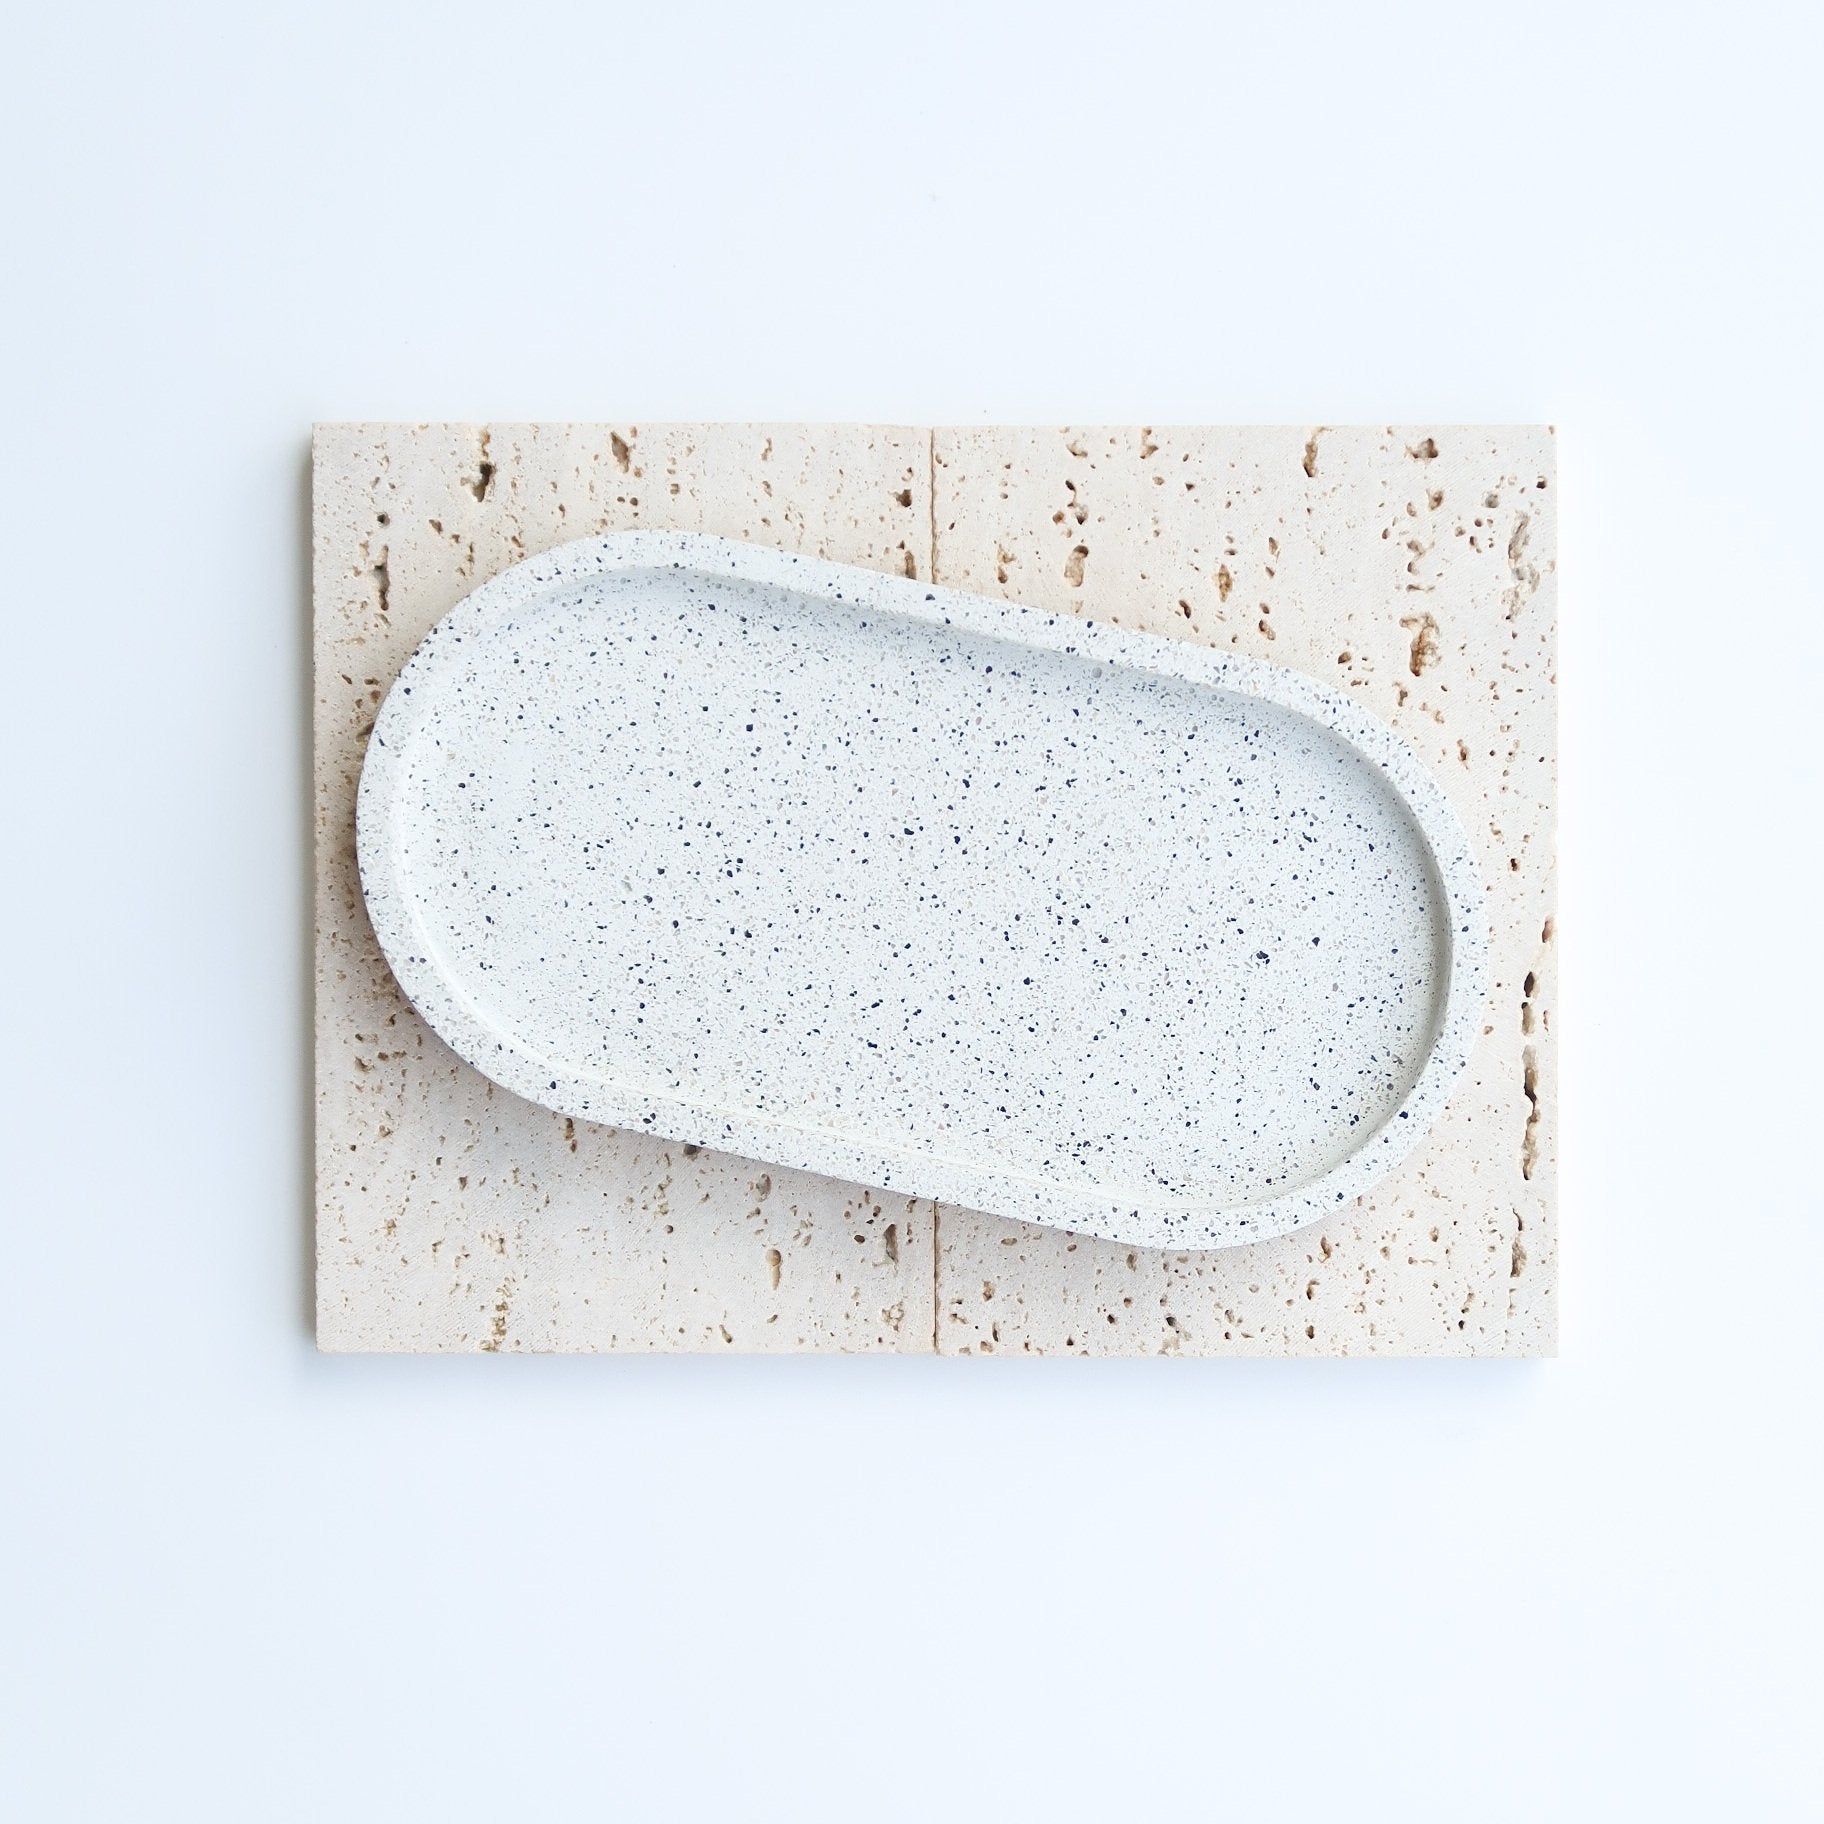 EverydayCo Oblong Tray - Speckled